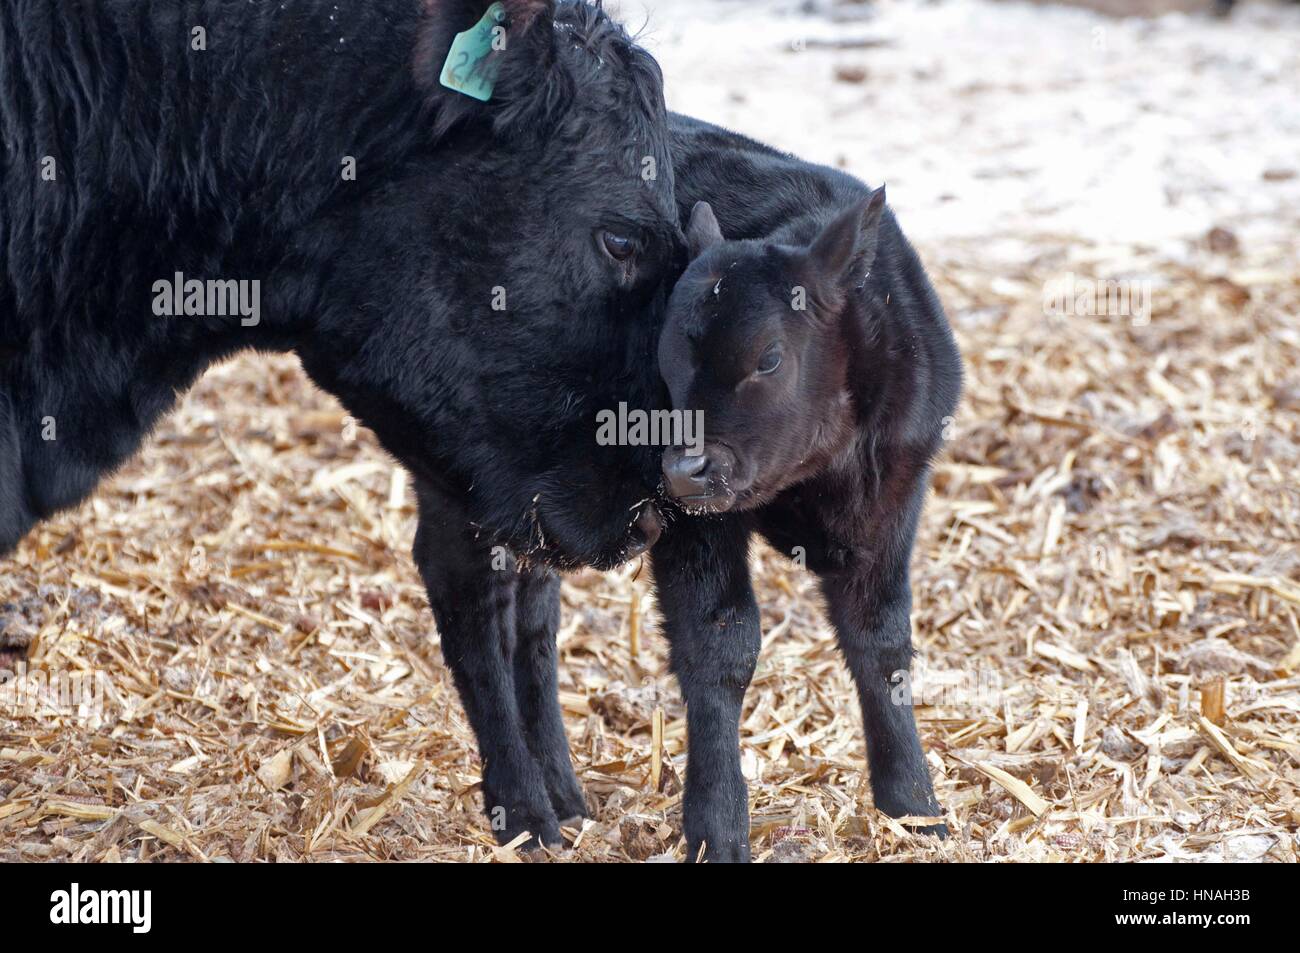 A baby calf nuzzles its mother in Waterloo, Iowa, USA. Stock Photo